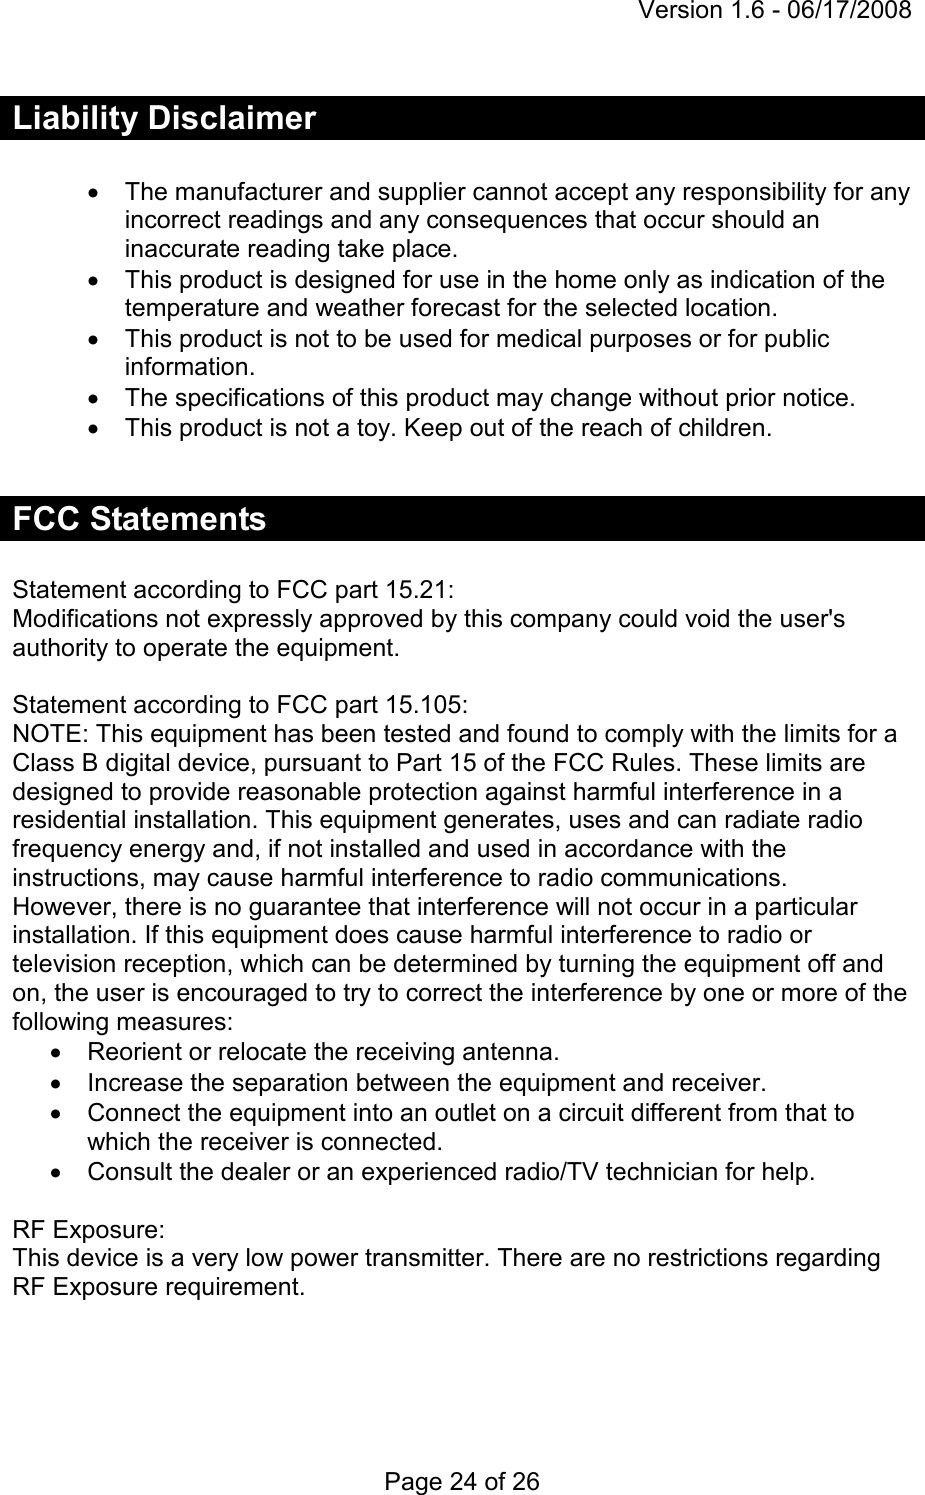 Version 1.6 - 06/17/2008 Page 24 of 26 Liability Disclaimer  •  The manufacturer and supplier cannot accept any responsibility for any incorrect readings and any consequences that occur should an inaccurate reading take place. •  This product is designed for use in the home only as indication of the temperature and weather forecast for the selected location. •  This product is not to be used for medical purposes or for public information. •  The specifications of this product may change without prior notice. •  This product is not a toy. Keep out of the reach of children.  FCC Statements  Statement according to FCC part 15.21: Modifications not expressly approved by this company could void the user&apos;s authority to operate the equipment.  Statement according to FCC part 15.105: NOTE: This equipment has been tested and found to comply with the limits for a Class B digital device, pursuant to Part 15 of the FCC Rules. These limits are designed to provide reasonable protection against harmful interference in a residential installation. This equipment generates, uses and can radiate radio frequency energy and, if not installed and used in accordance with the instructions, may cause harmful interference to radio communications. However, there is no guarantee that interference will not occur in a particular installation. If this equipment does cause harmful interference to radio or television reception, which can be determined by turning the equipment off and on, the user is encouraged to try to correct the interference by one or more of the following measures: •  Reorient or relocate the receiving antenna. •  Increase the separation between the equipment and receiver. •  Connect the equipment into an outlet on a circuit different from that to which the receiver is connected. •  Consult the dealer or an experienced radio/TV technician for help.  RF Exposure: This device is a very low power transmitter. There are no restrictions regarding RF Exposure requirement.